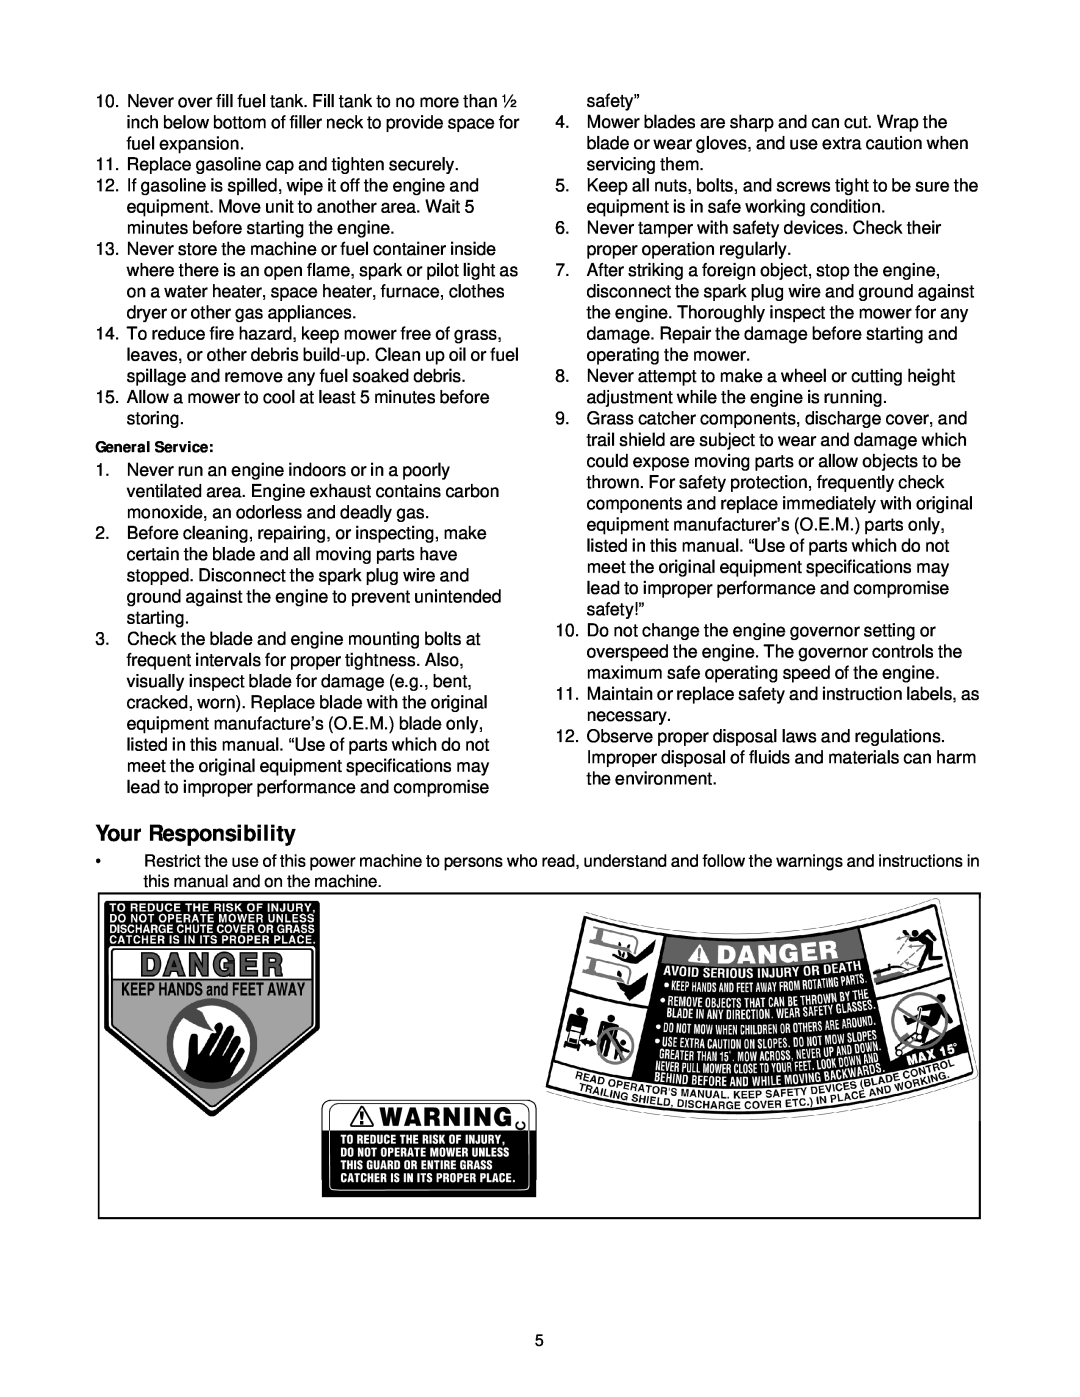 MTD 469 manual Your Responsibility, General Service 